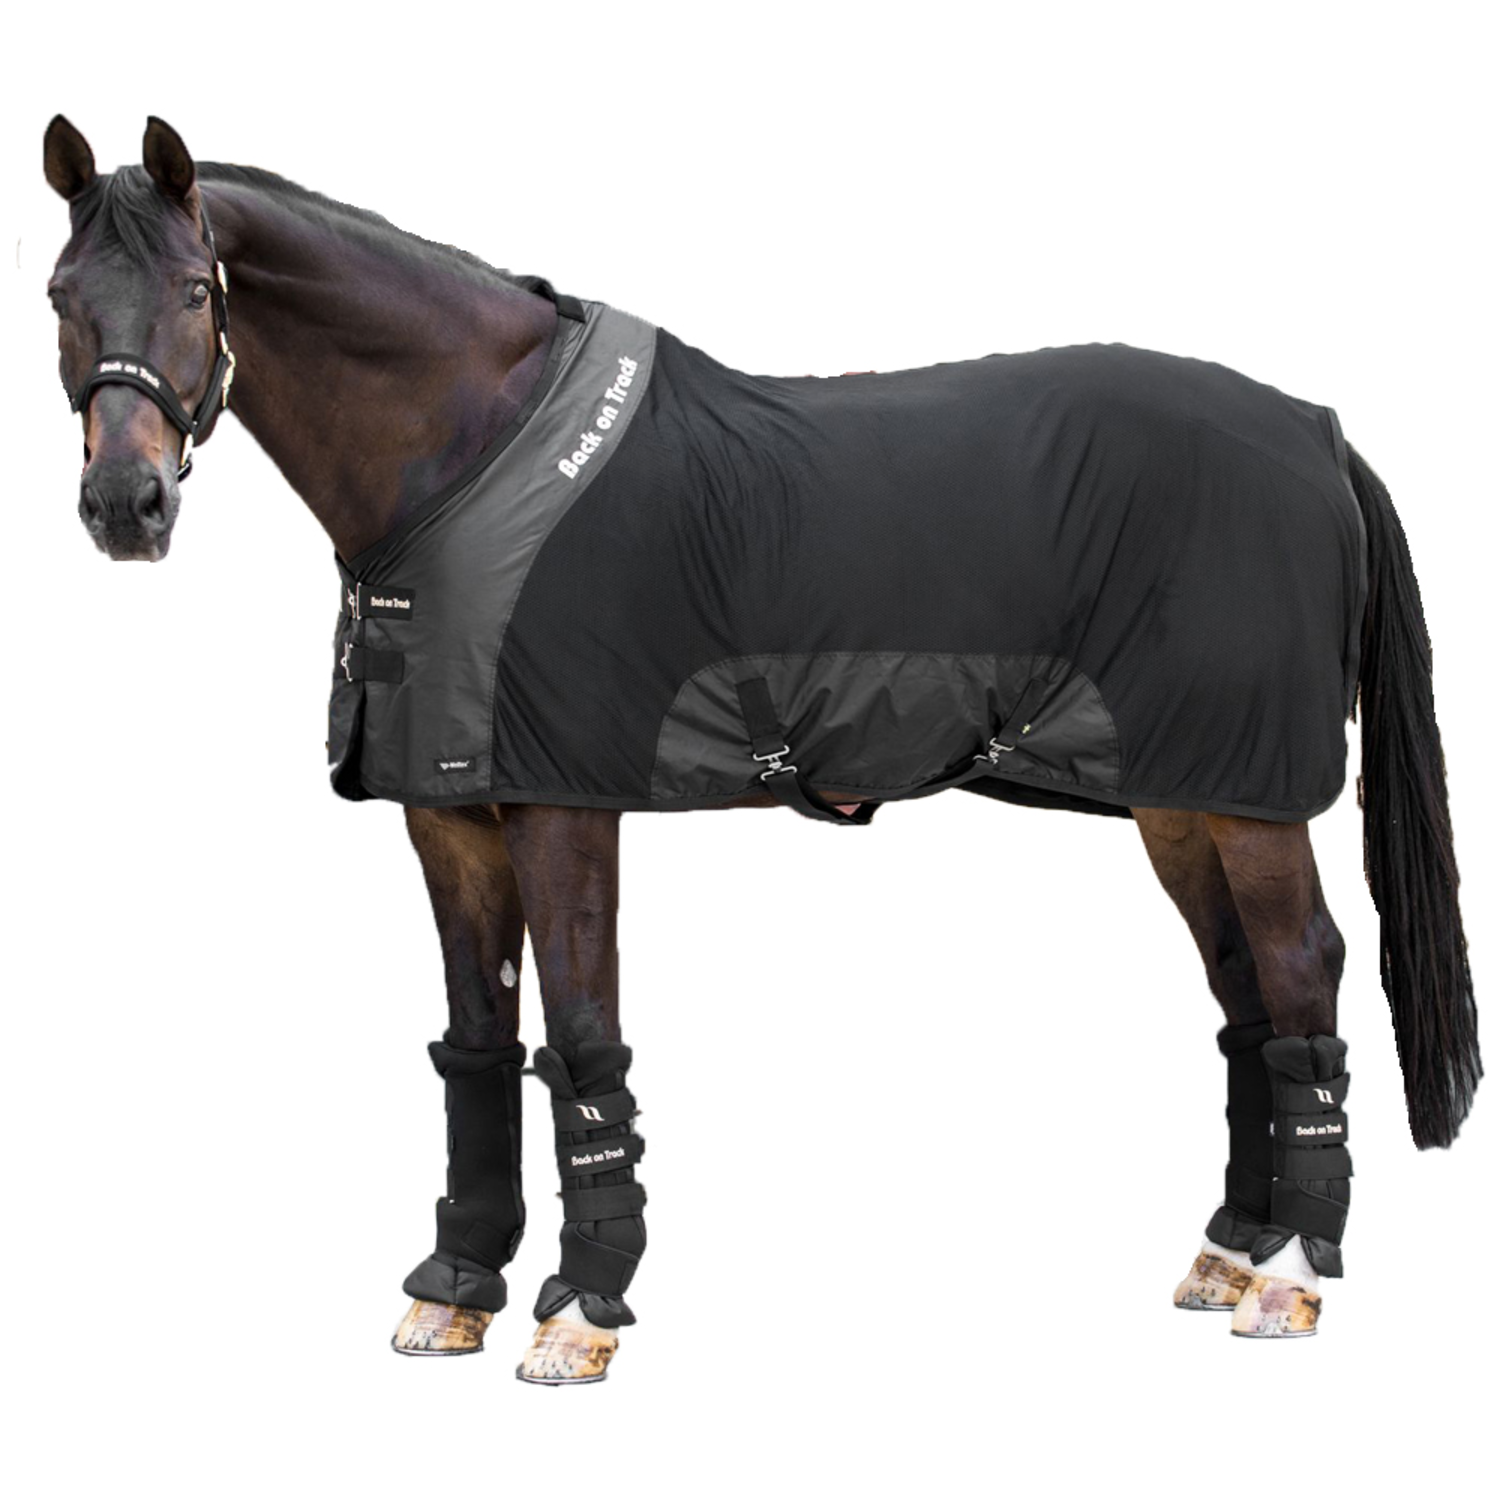 Therapeutic Horse Mesh Neck Cover, Horse Blanket Accessory